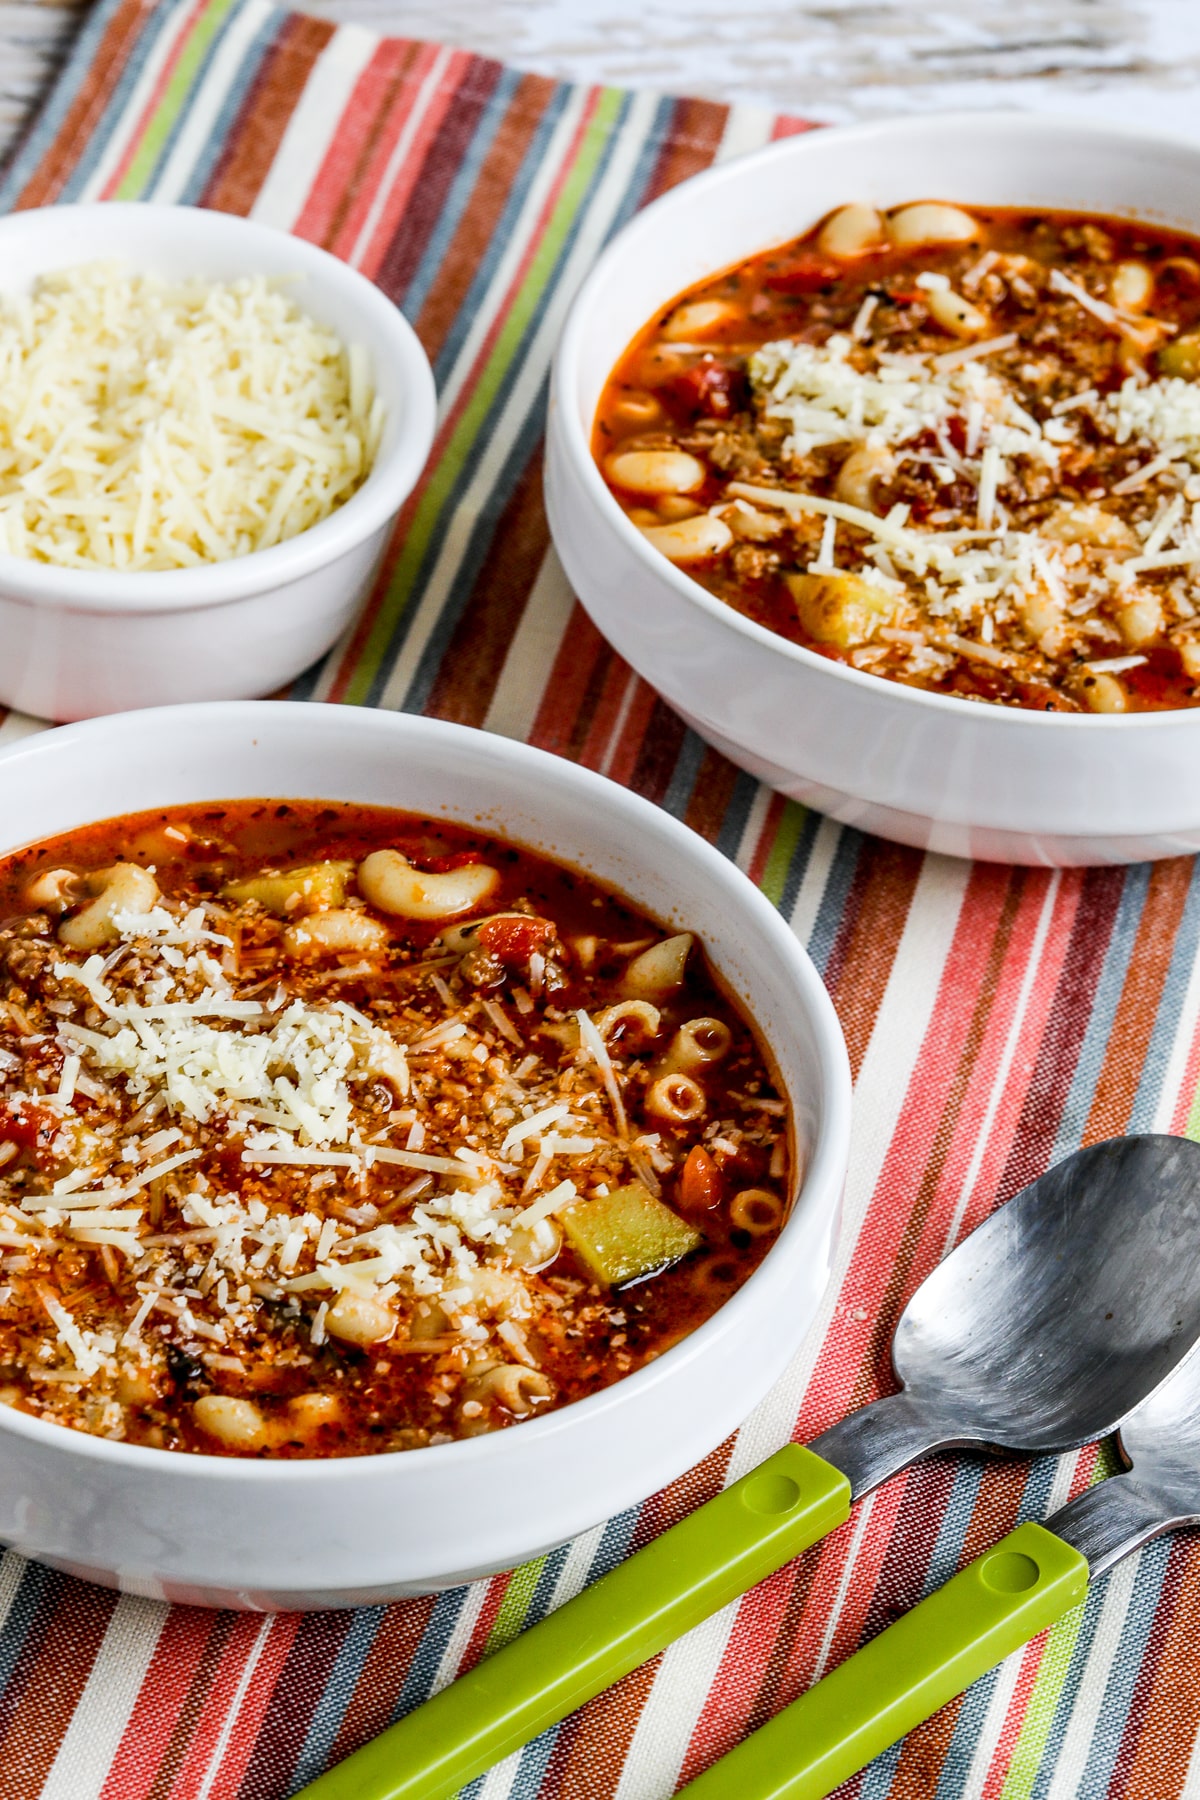 Italian Sausage, Zucchini, and Macaroni Soup shown in two bowls with spoons and Parmesan